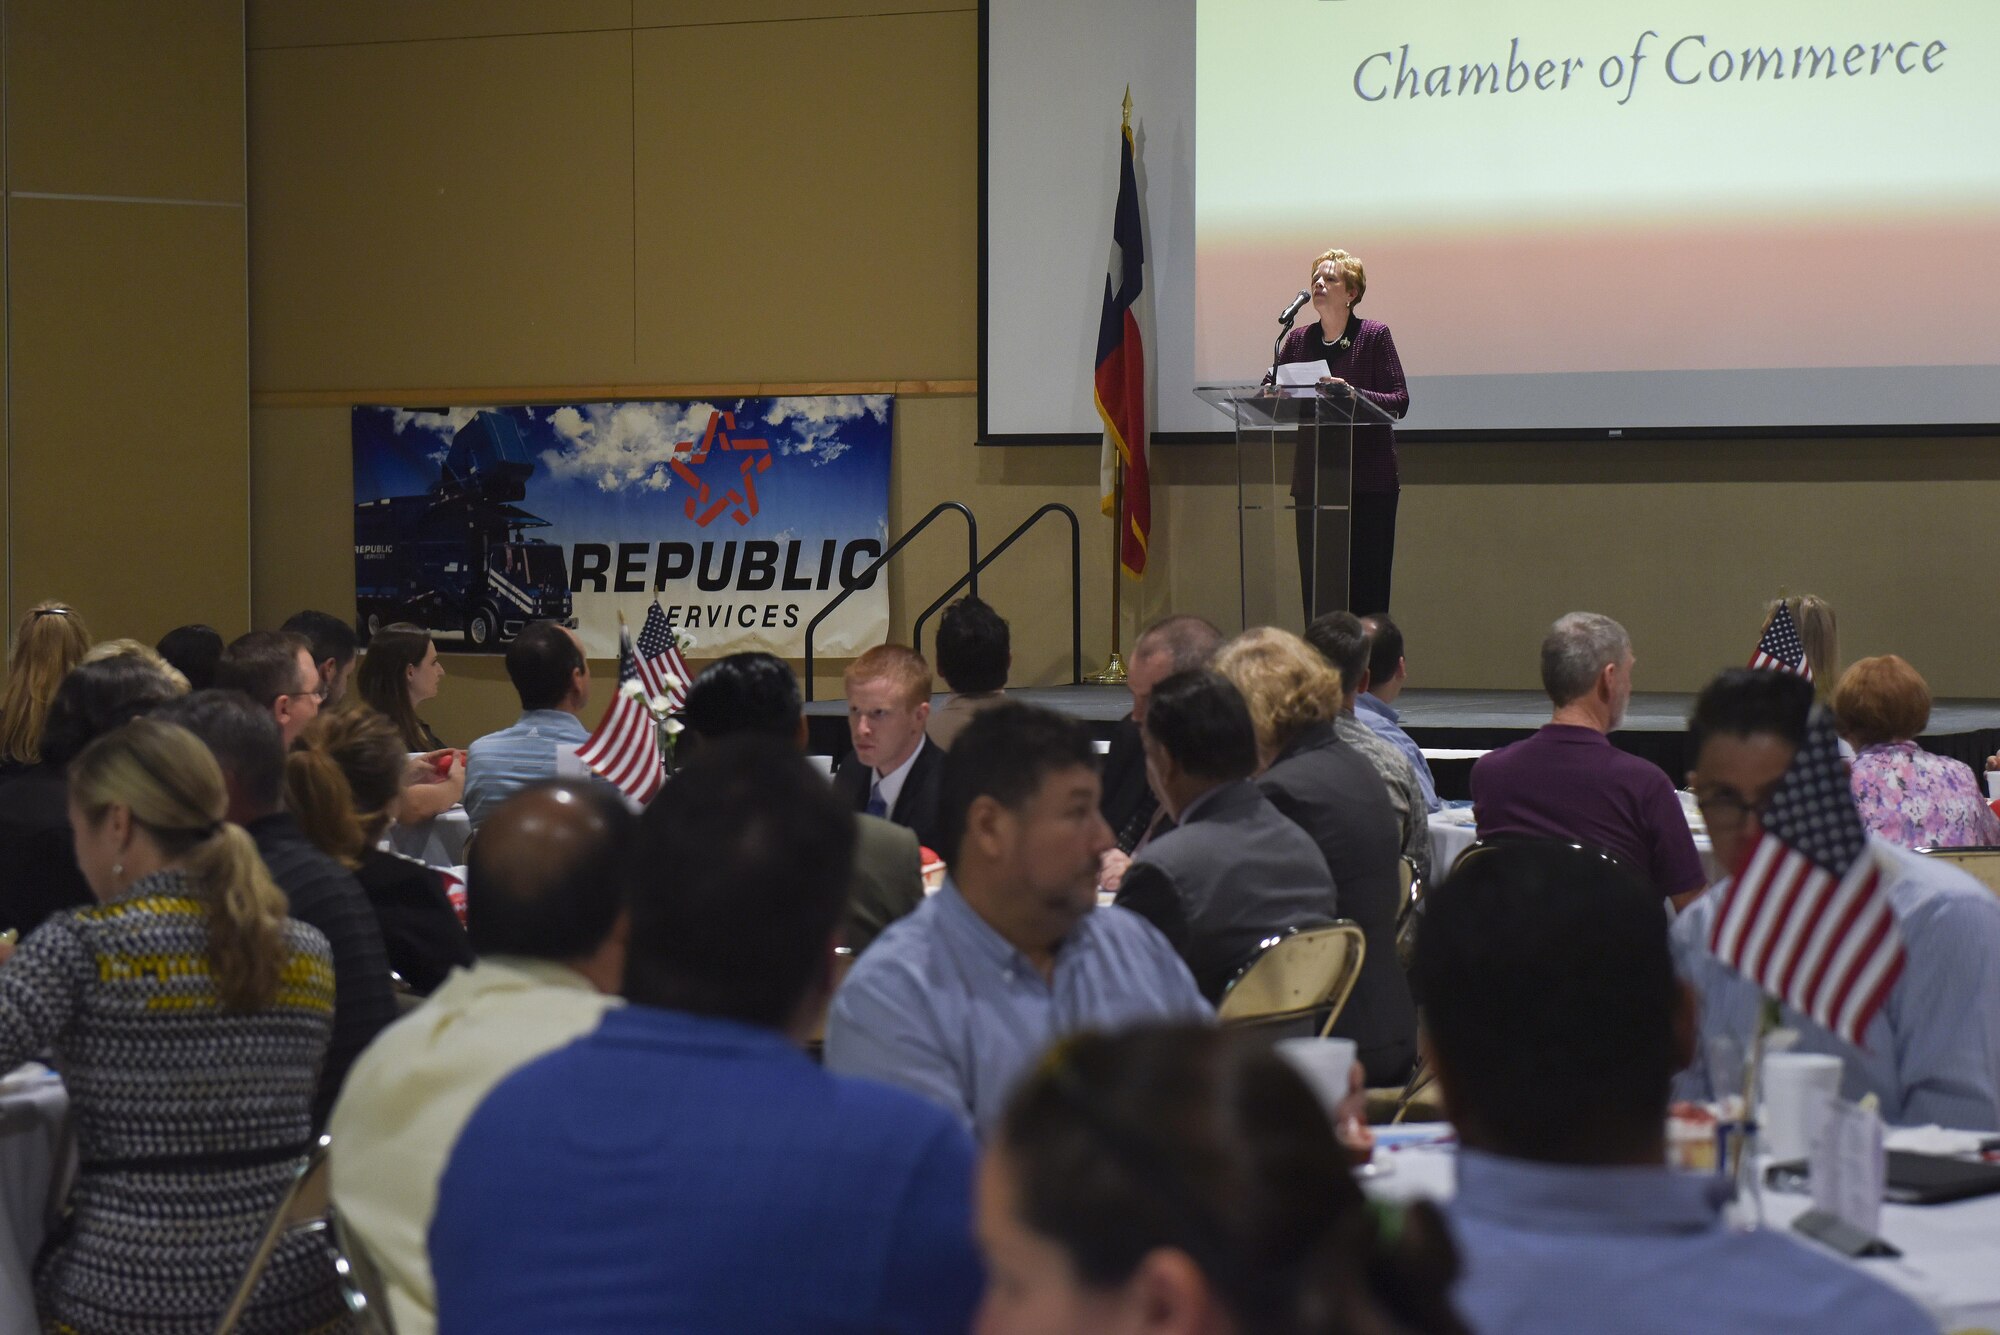 Dr. Carol Bonds, Texas Military Preparedness Commission member, delivers a speech at the annual Chamber of Commerce luncheon at the McNease Convention Center in San Angelo, Texas, March 21, 2017. Bonds introduced U.S. Air Force Col. Michael Downs, 17th Training Wing Commander’s and highlighted his accomplishments and how influential he has been in the local community. (U.S. Air Force photo by Airman 1st Class Chase Sousa/Released)